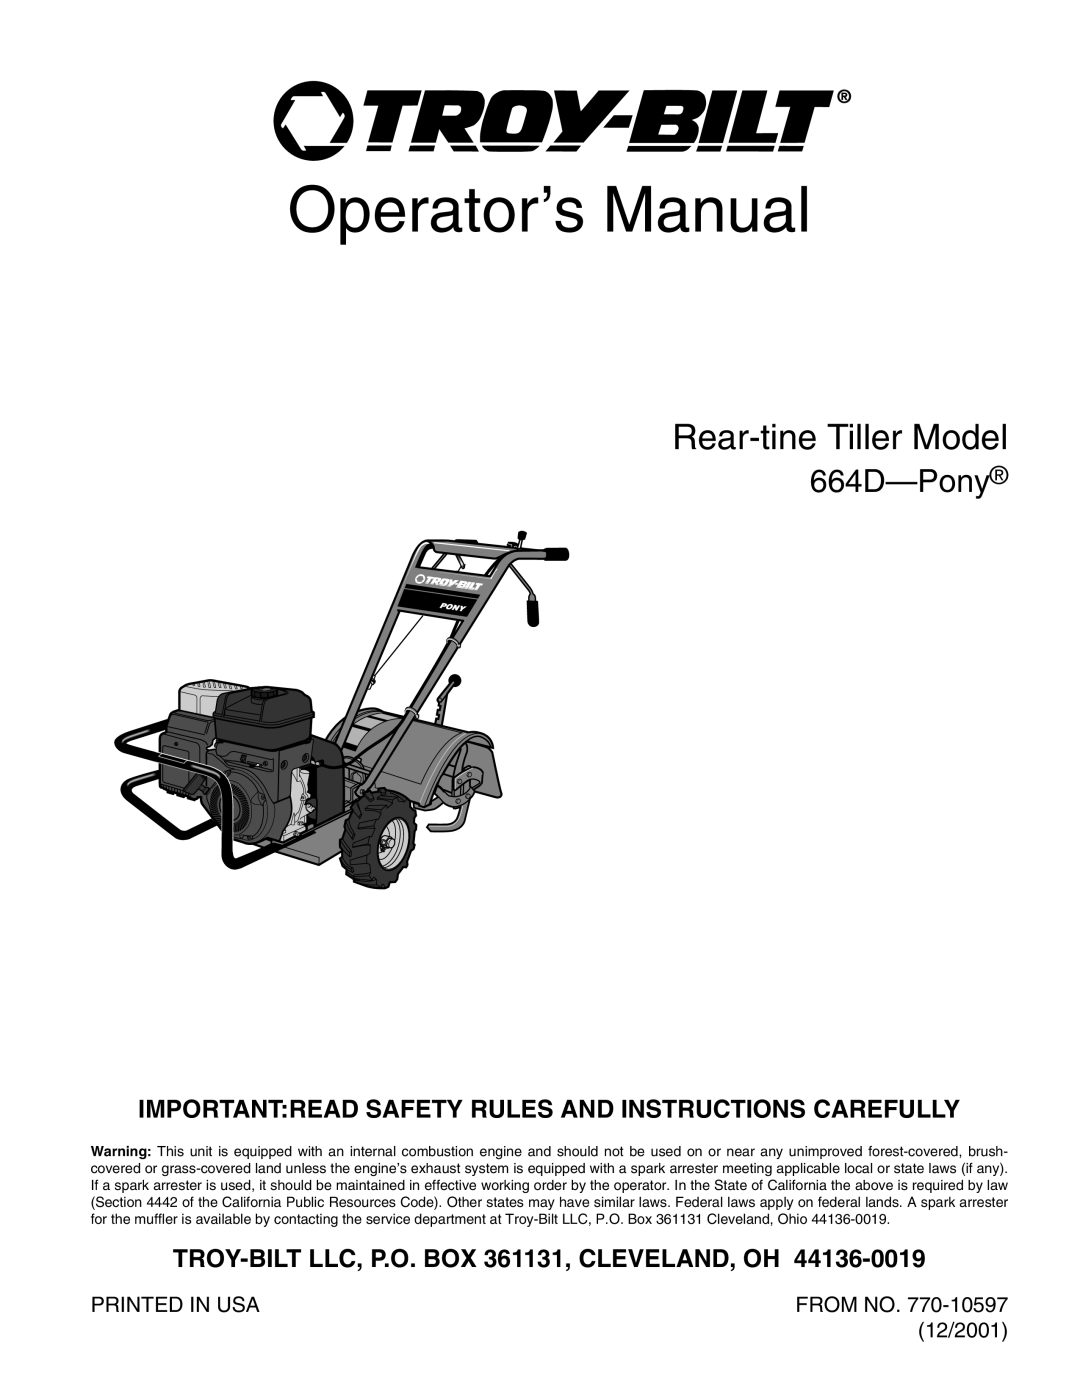 Troy-Bilt 664D-Pony manual Importantread Safety Rules And Instructions Carefully, Printed In Usa, From No, 12/2001 